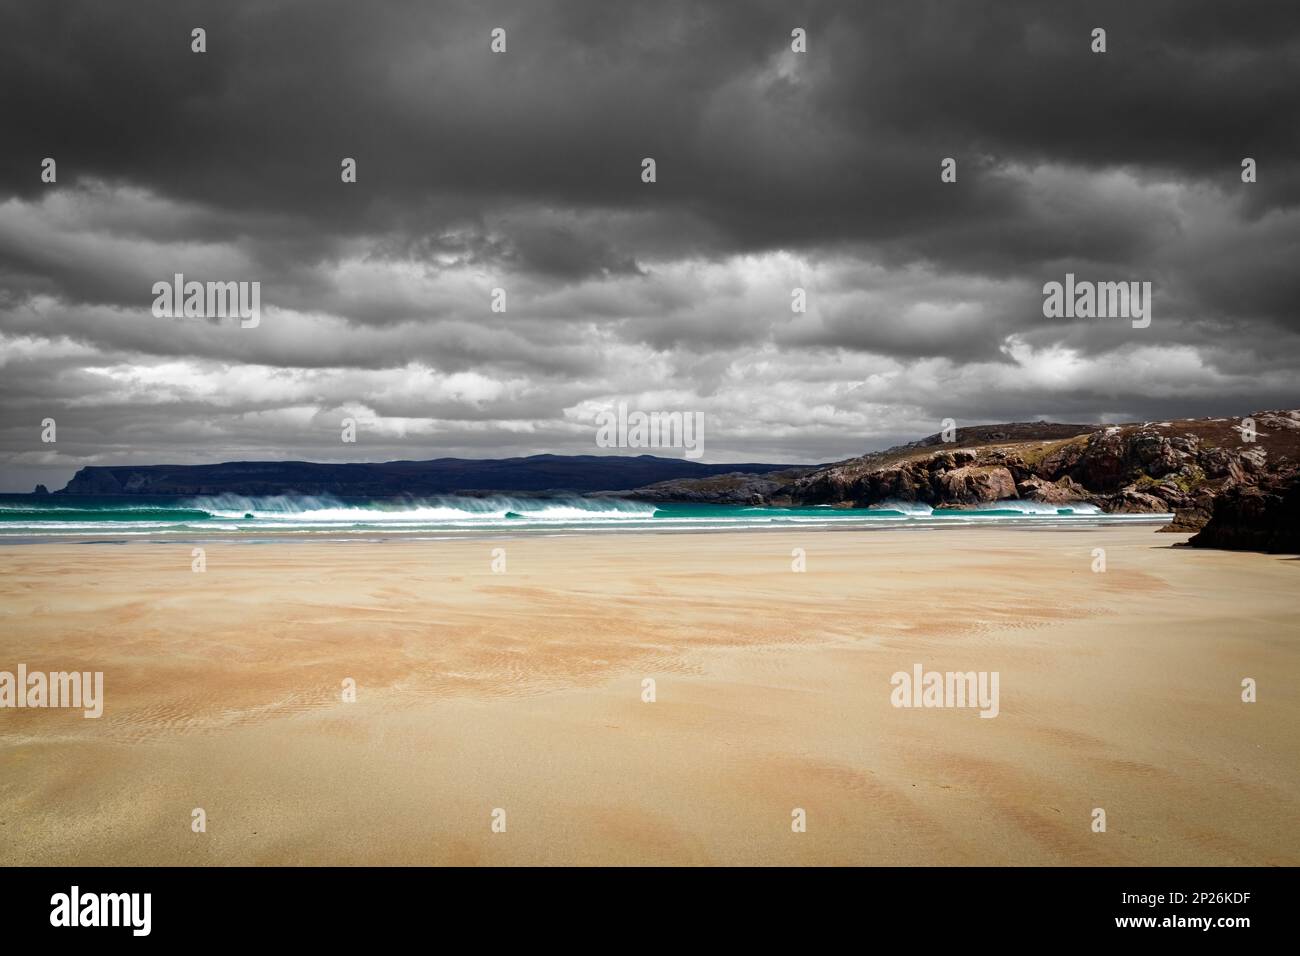 The beautiful sandy beaches awith awesome clouds and turquoise water in Scotland Stock Photo